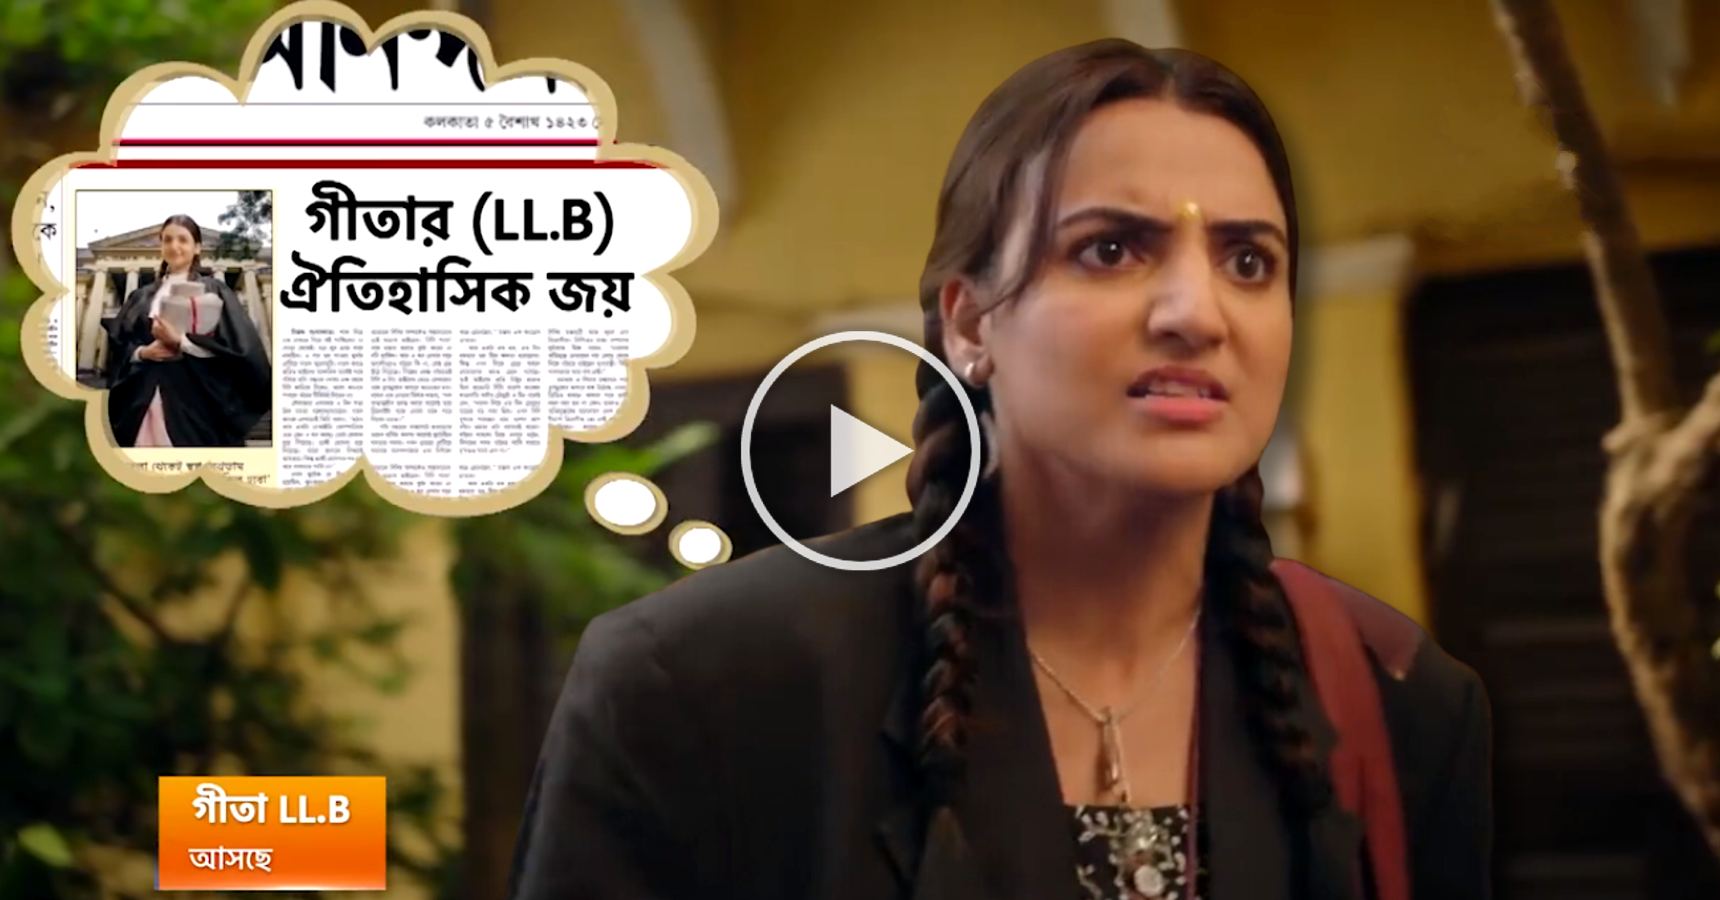 Star Jalsha new Bengali serial Geeta LLB promo is out now